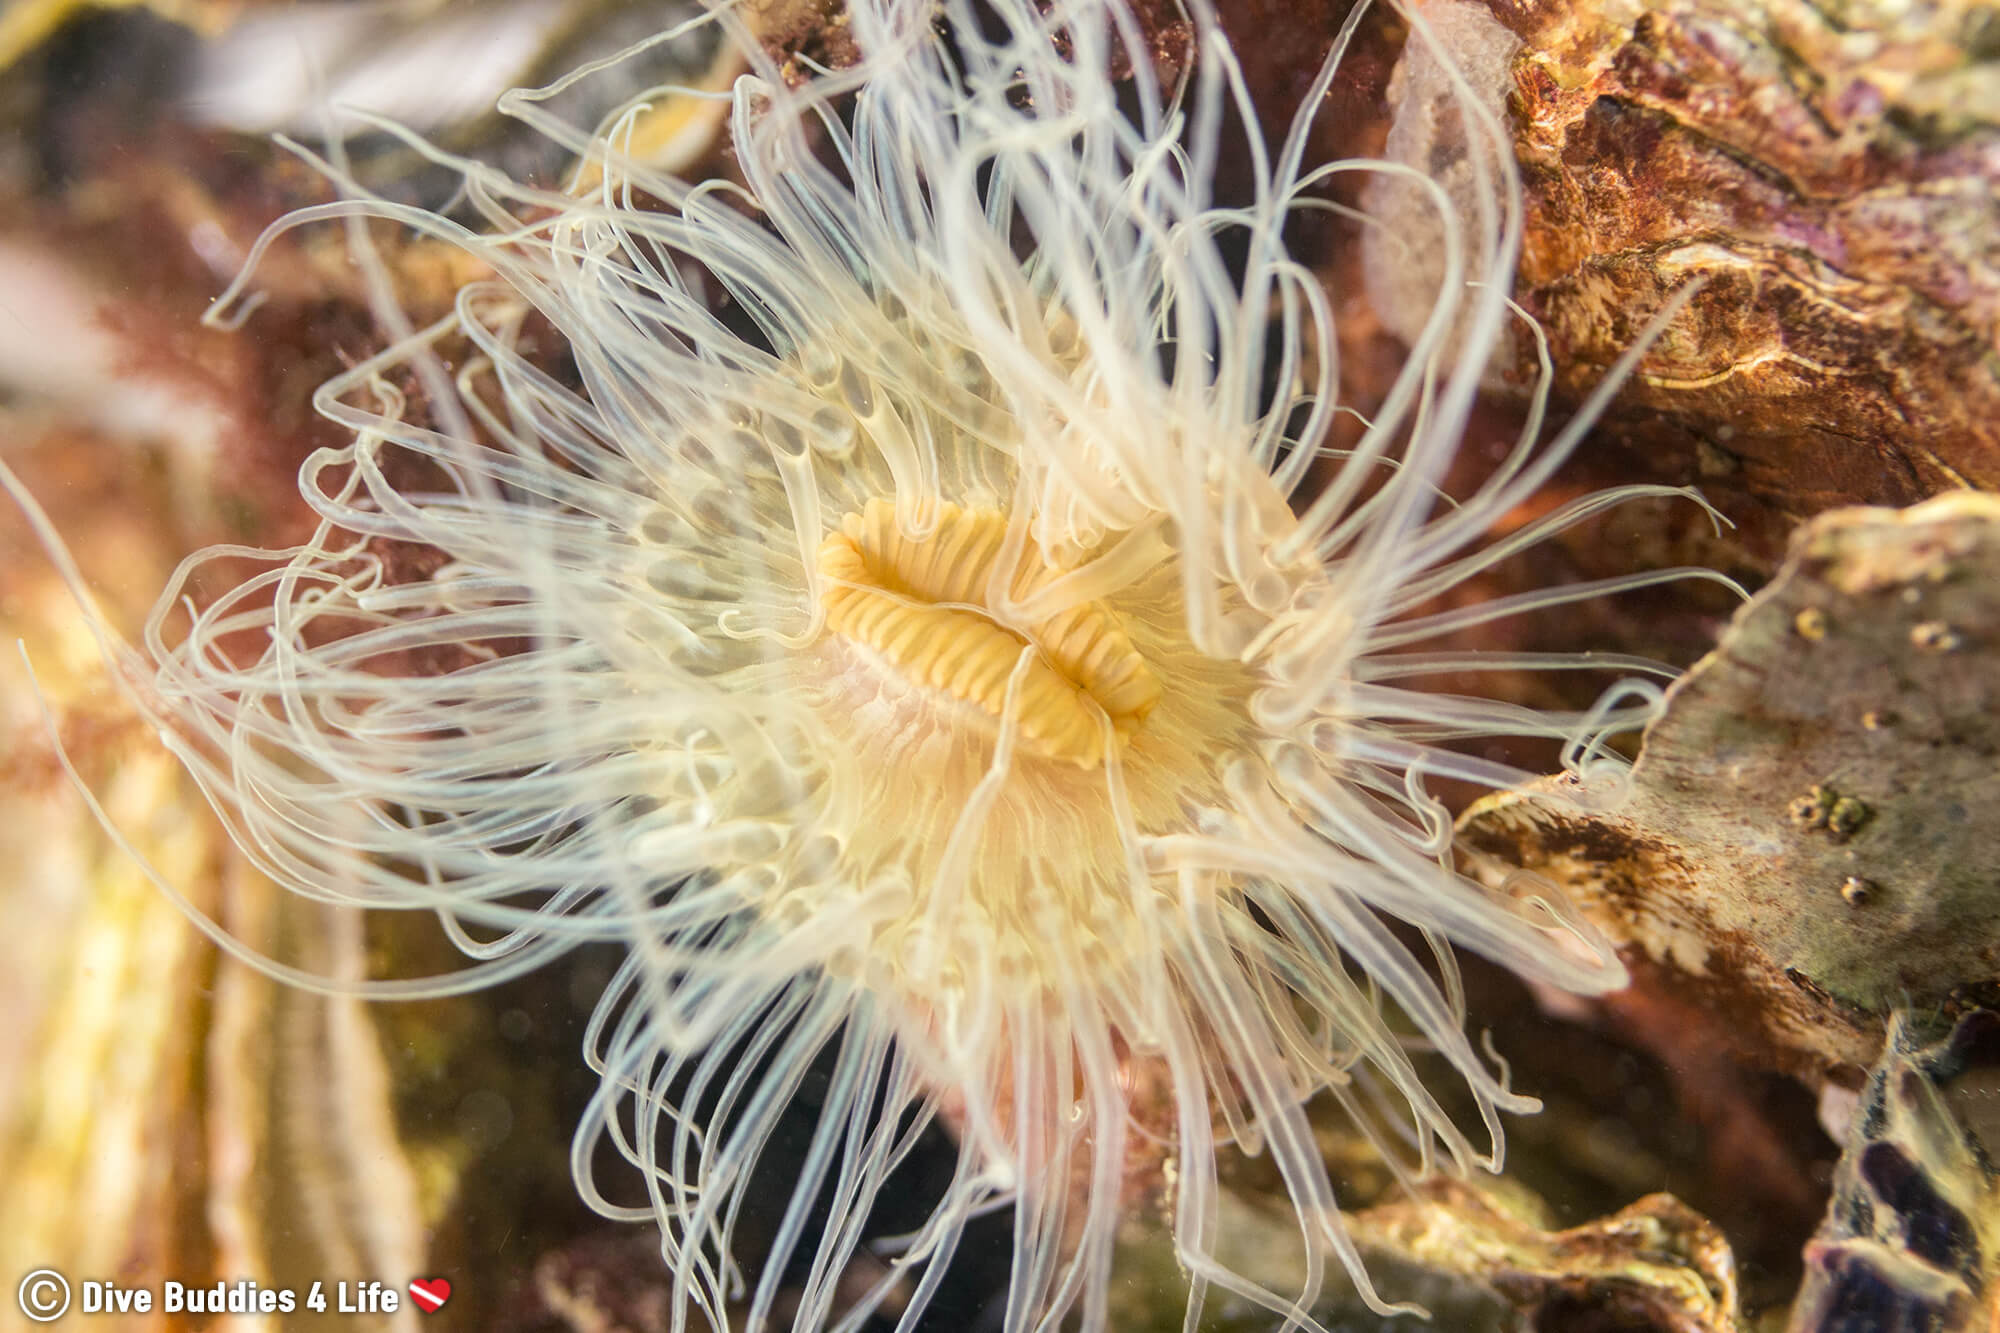 Another Beautiful Translucent Anemone Centre In The Netherlands Grevelingenmeer Lake